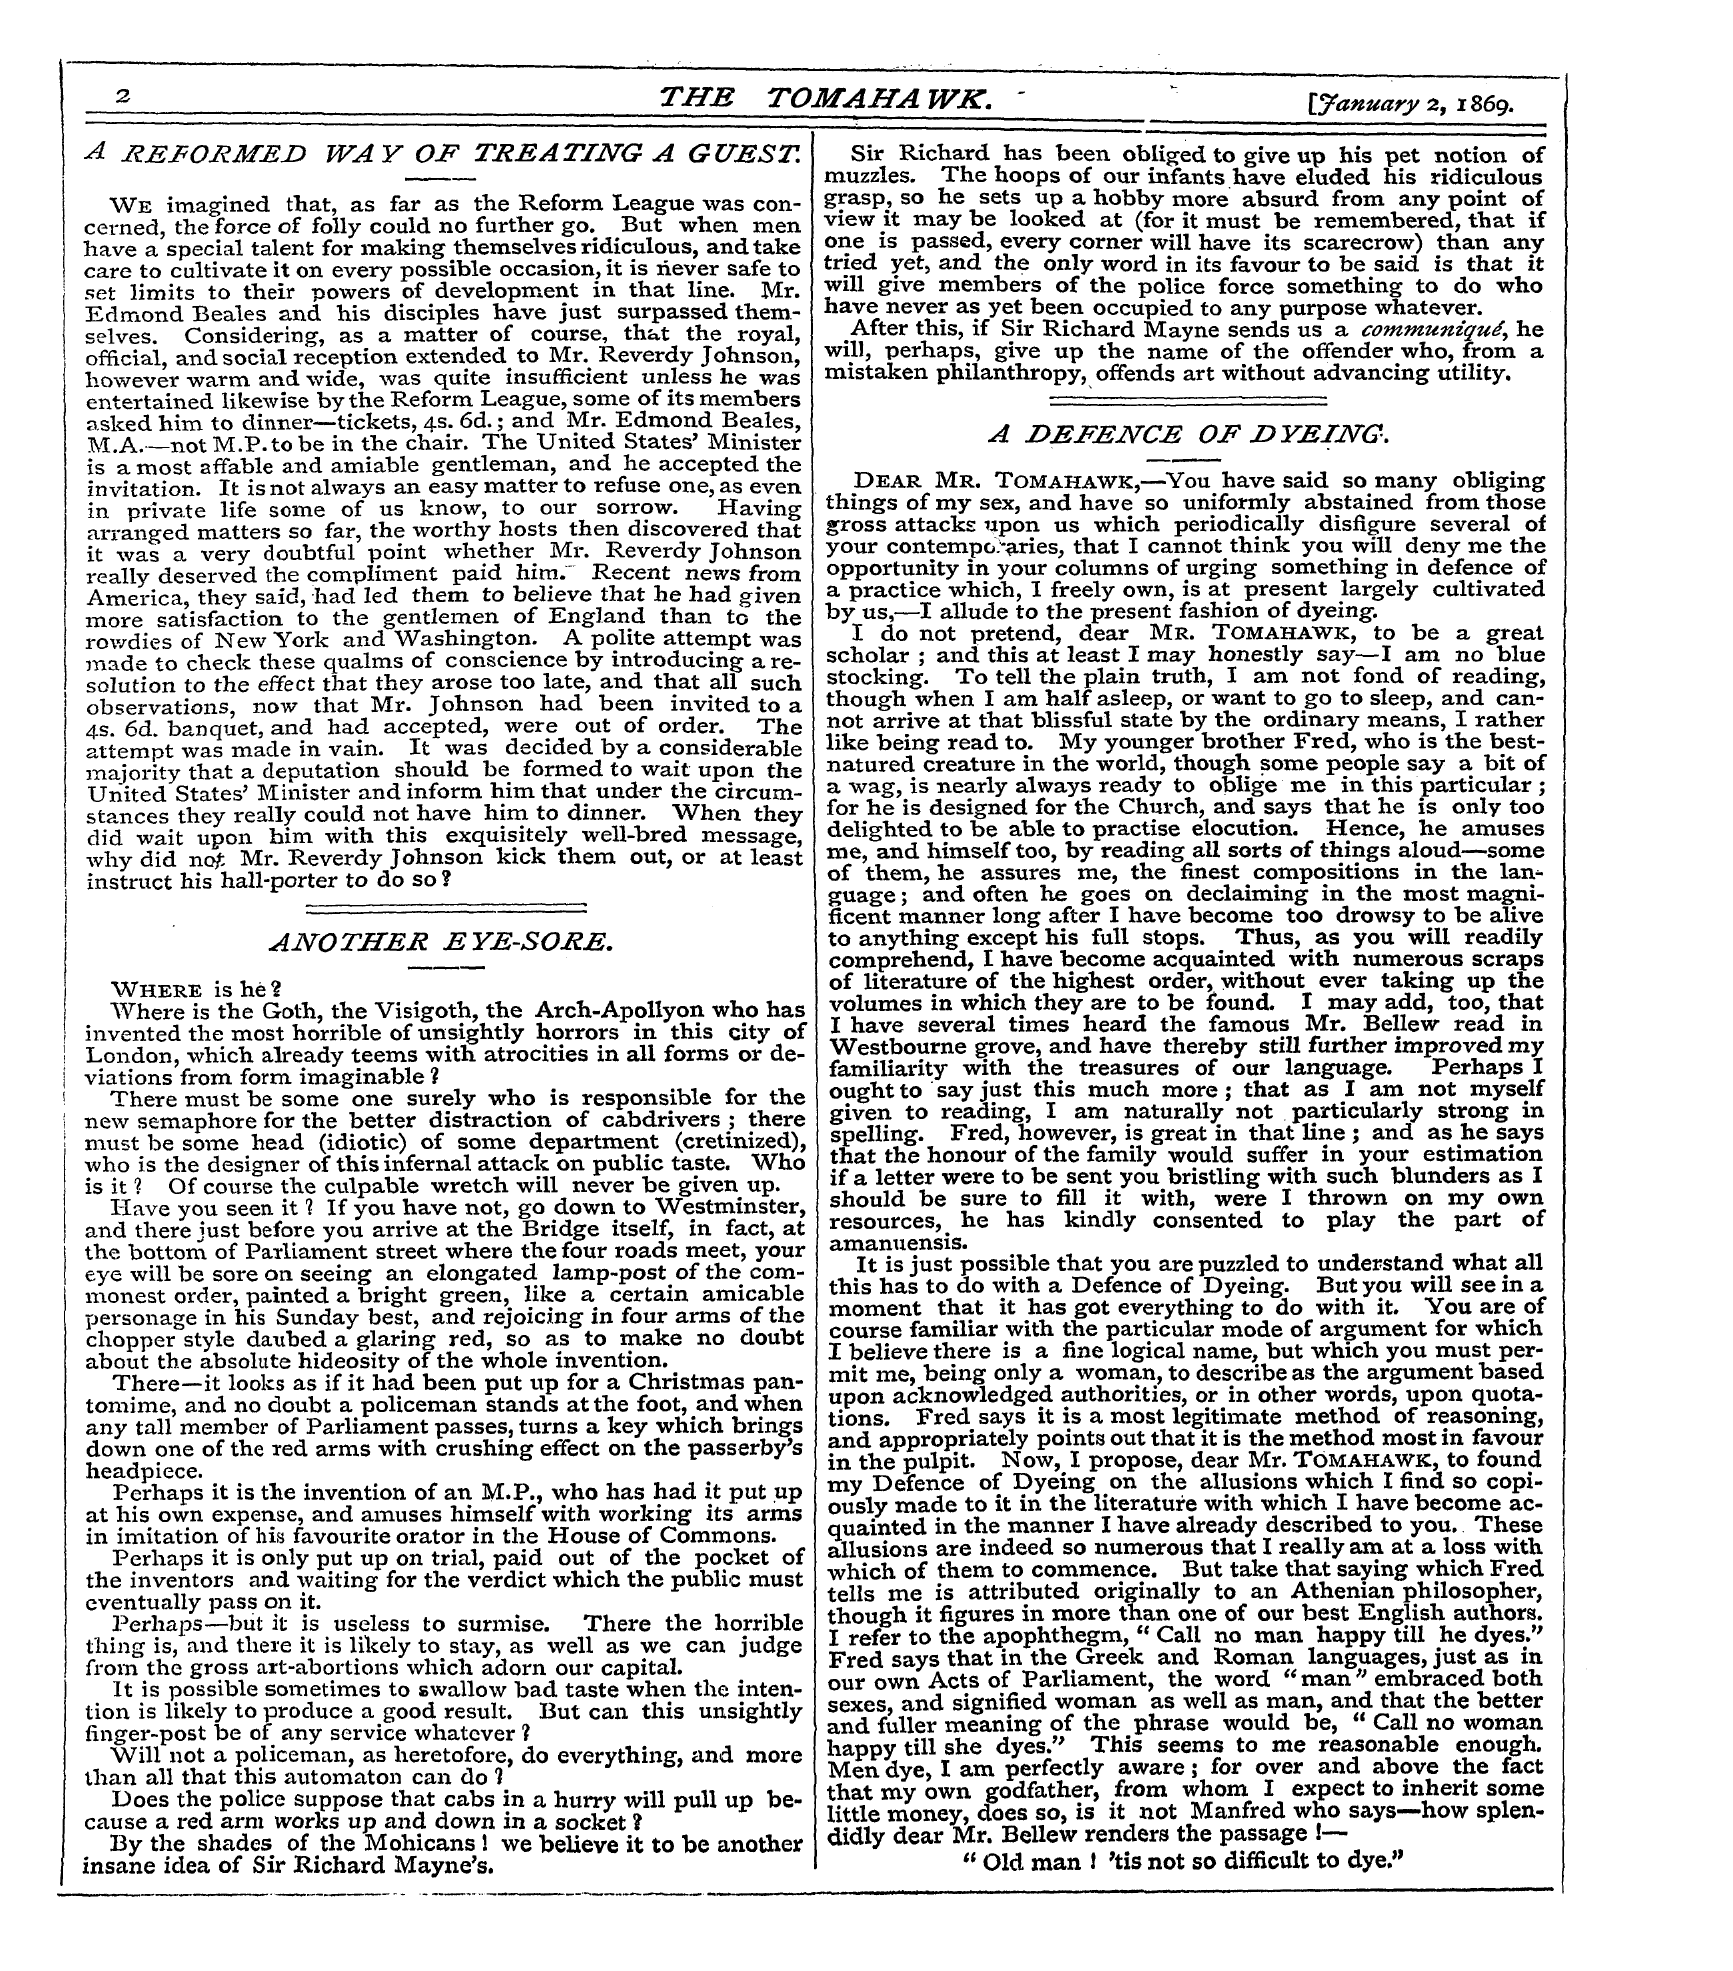 Tomahawk (1867-1870): jS F Y, 1st edition - Another Eye-Sore.